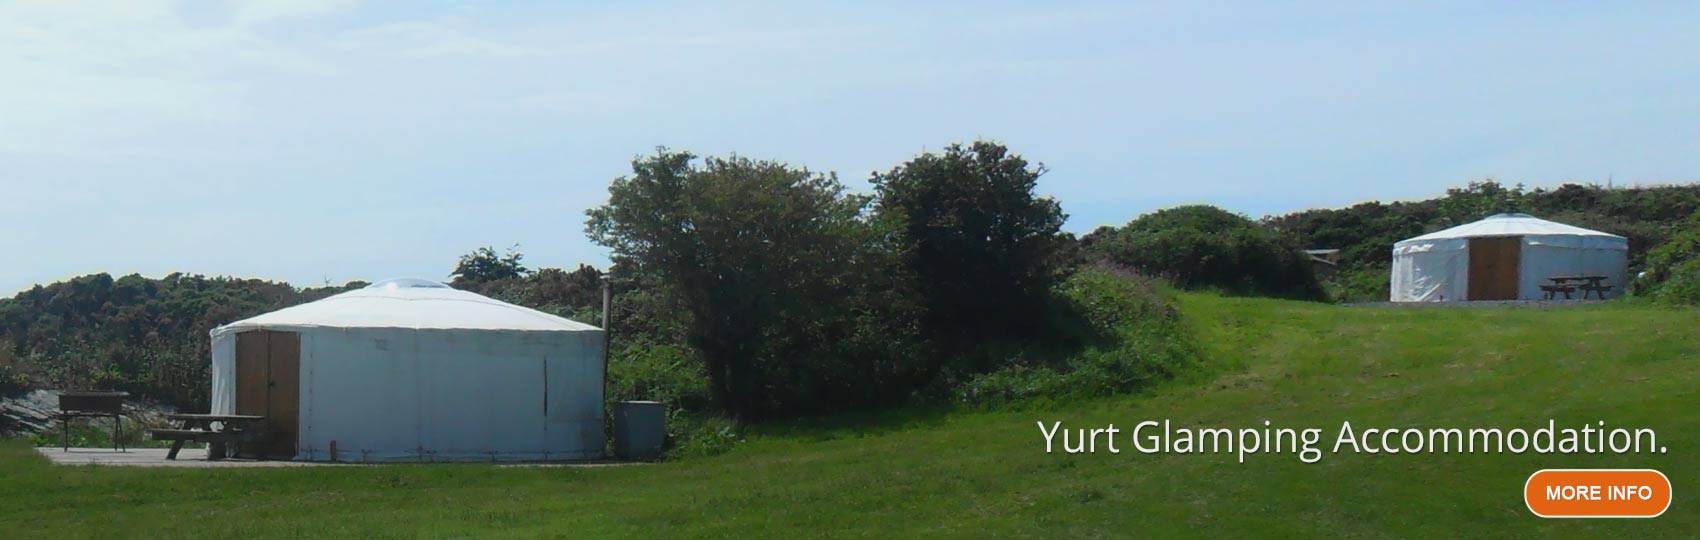 Two white traditional glamping yurts on a grass verge